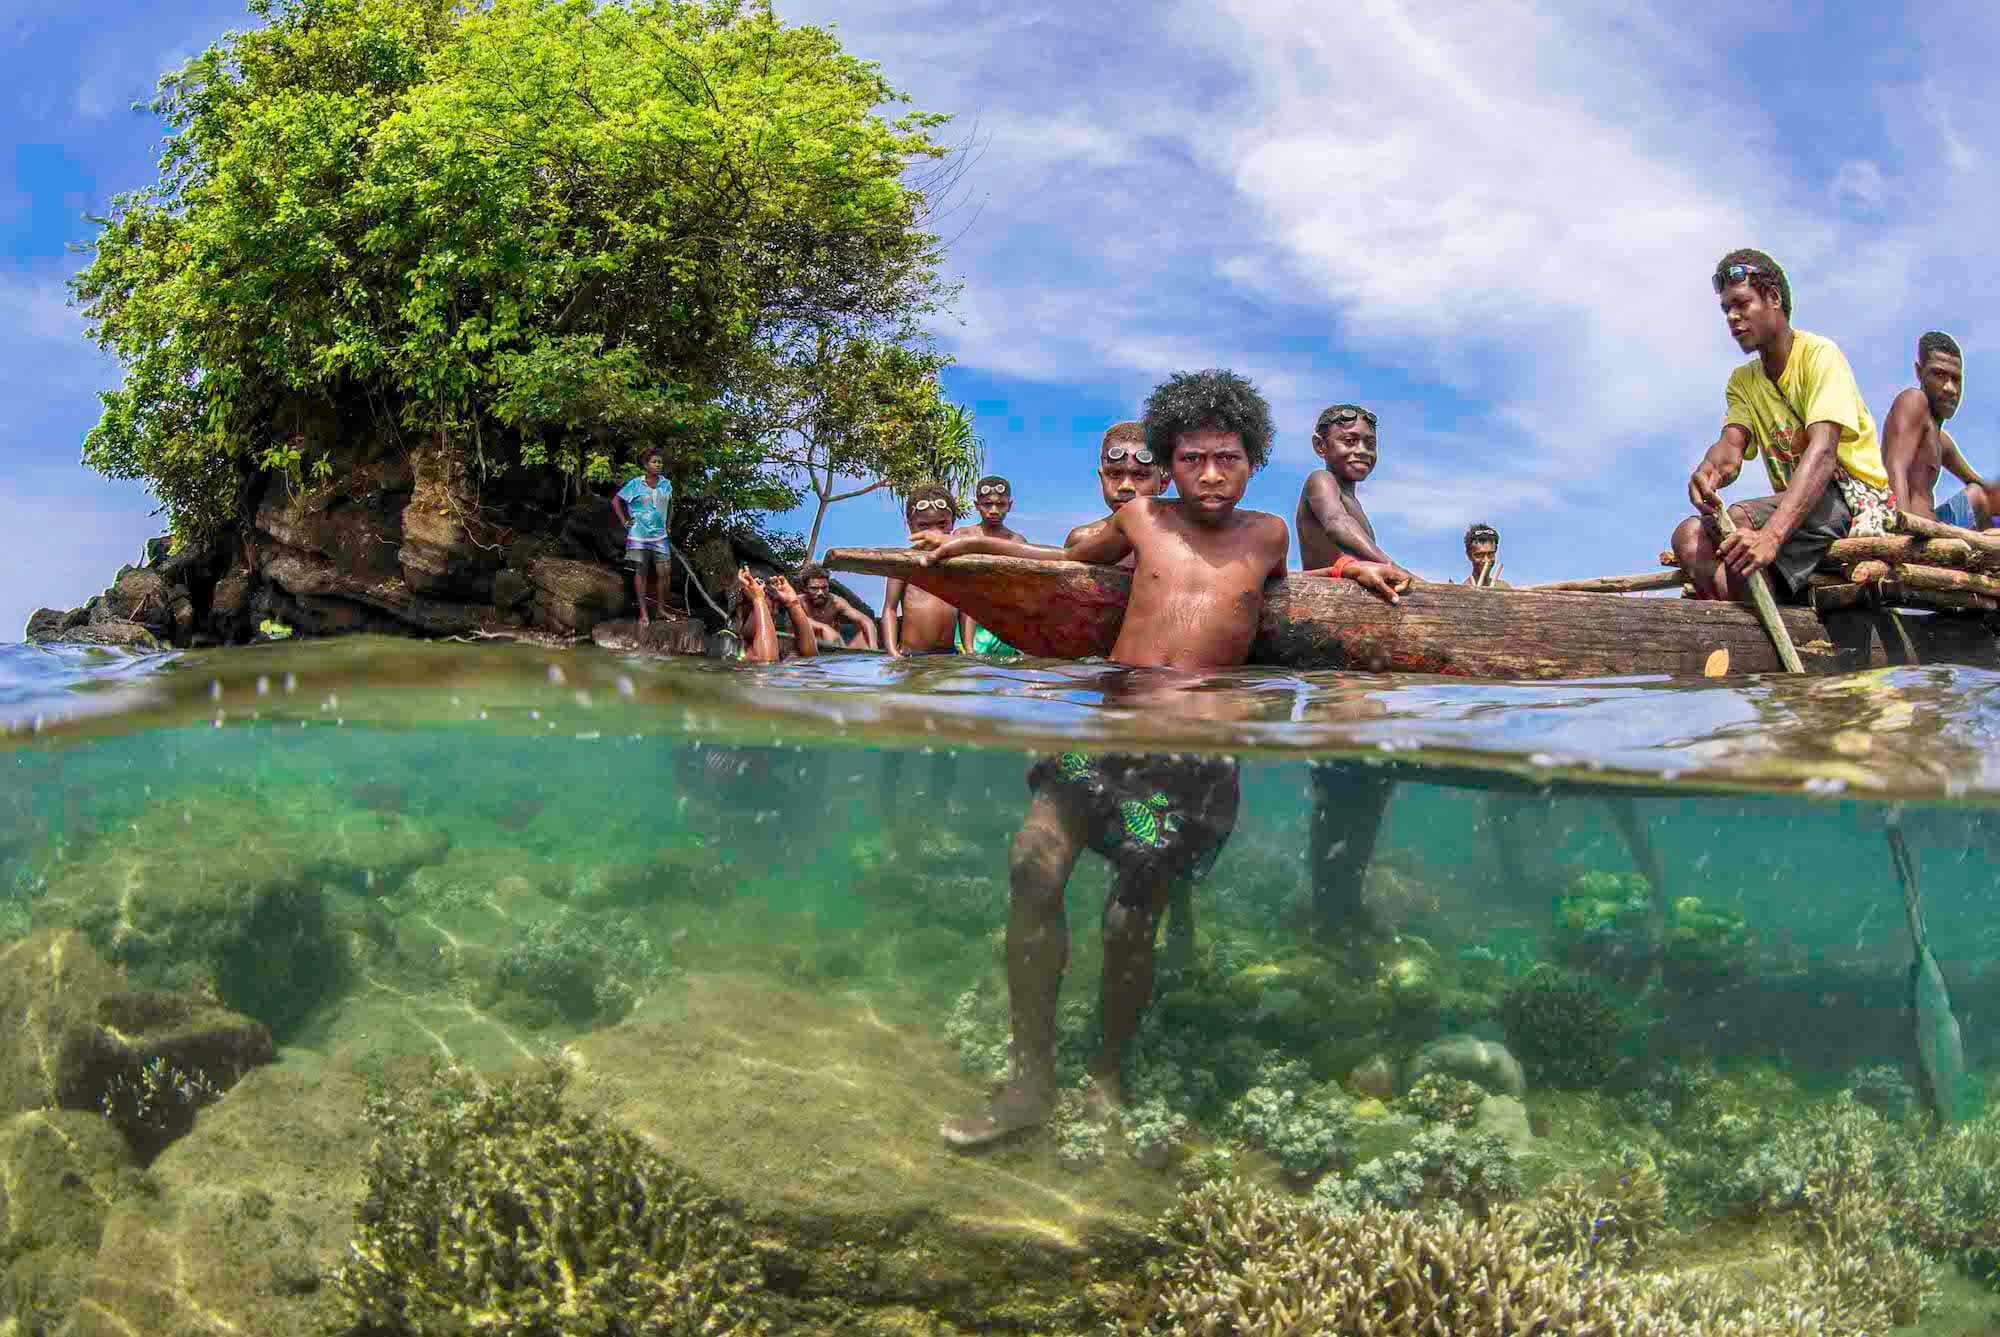 Local Papua New Guinea boys in front of Mangrove Trees